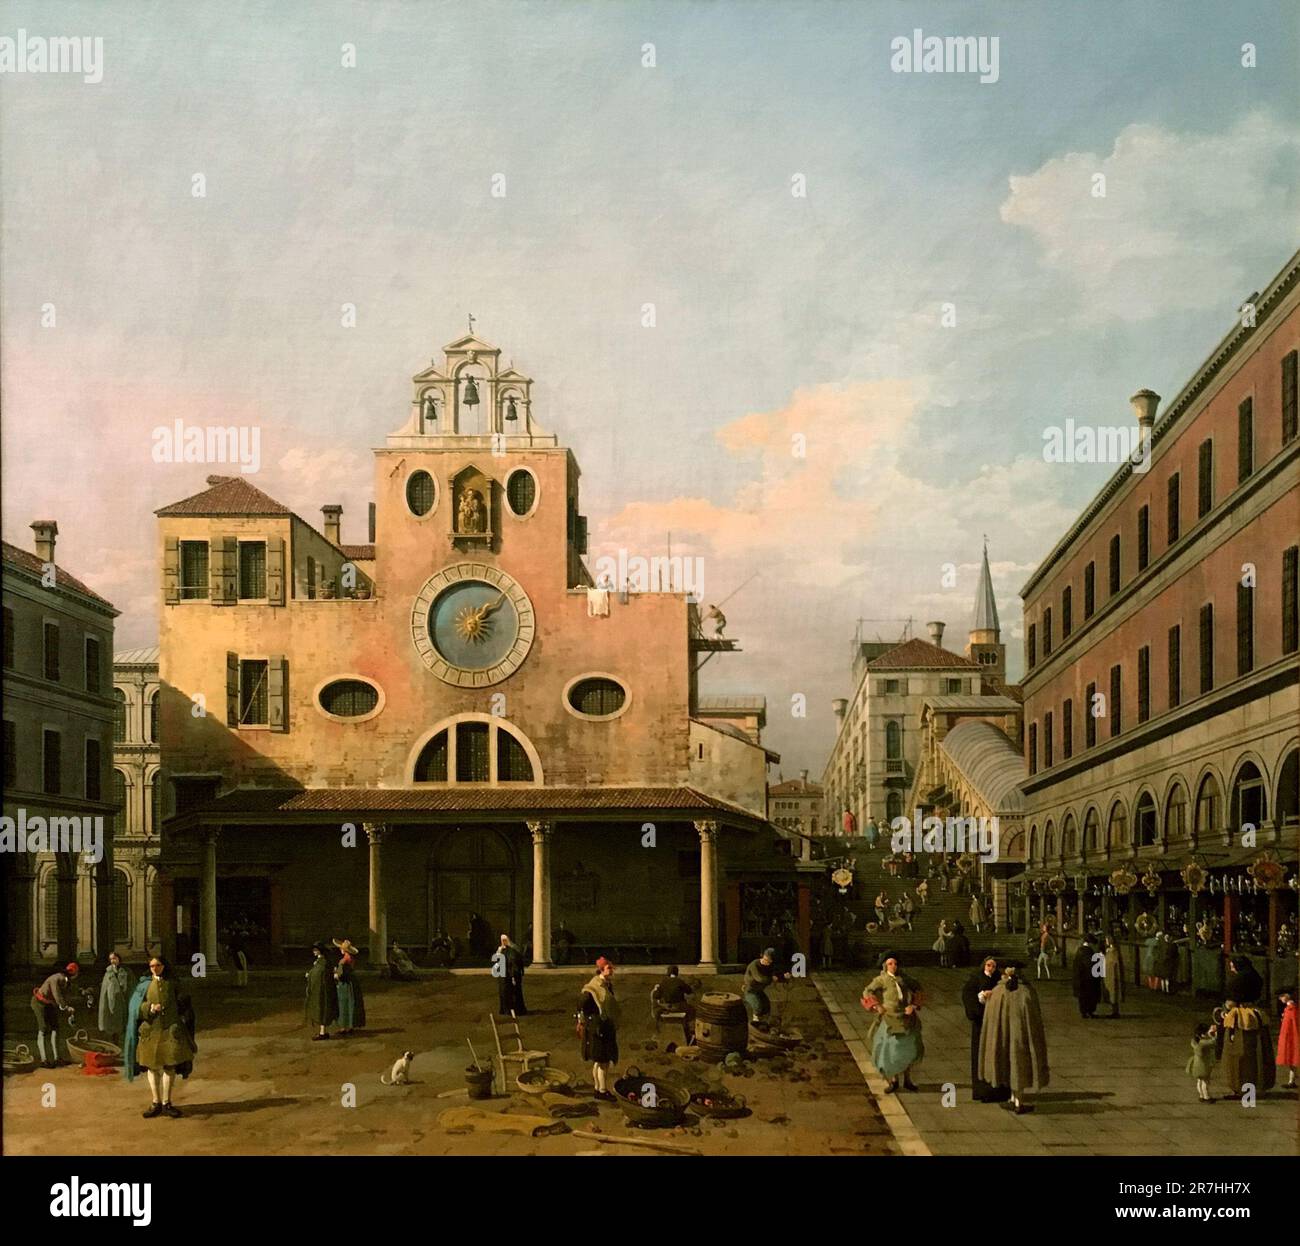 Campo San Giacomo Di Rialto, Venice  painted by the Venetian painter Giovanni Antonio Canal, commonly known as Canaletto. Stock Photo